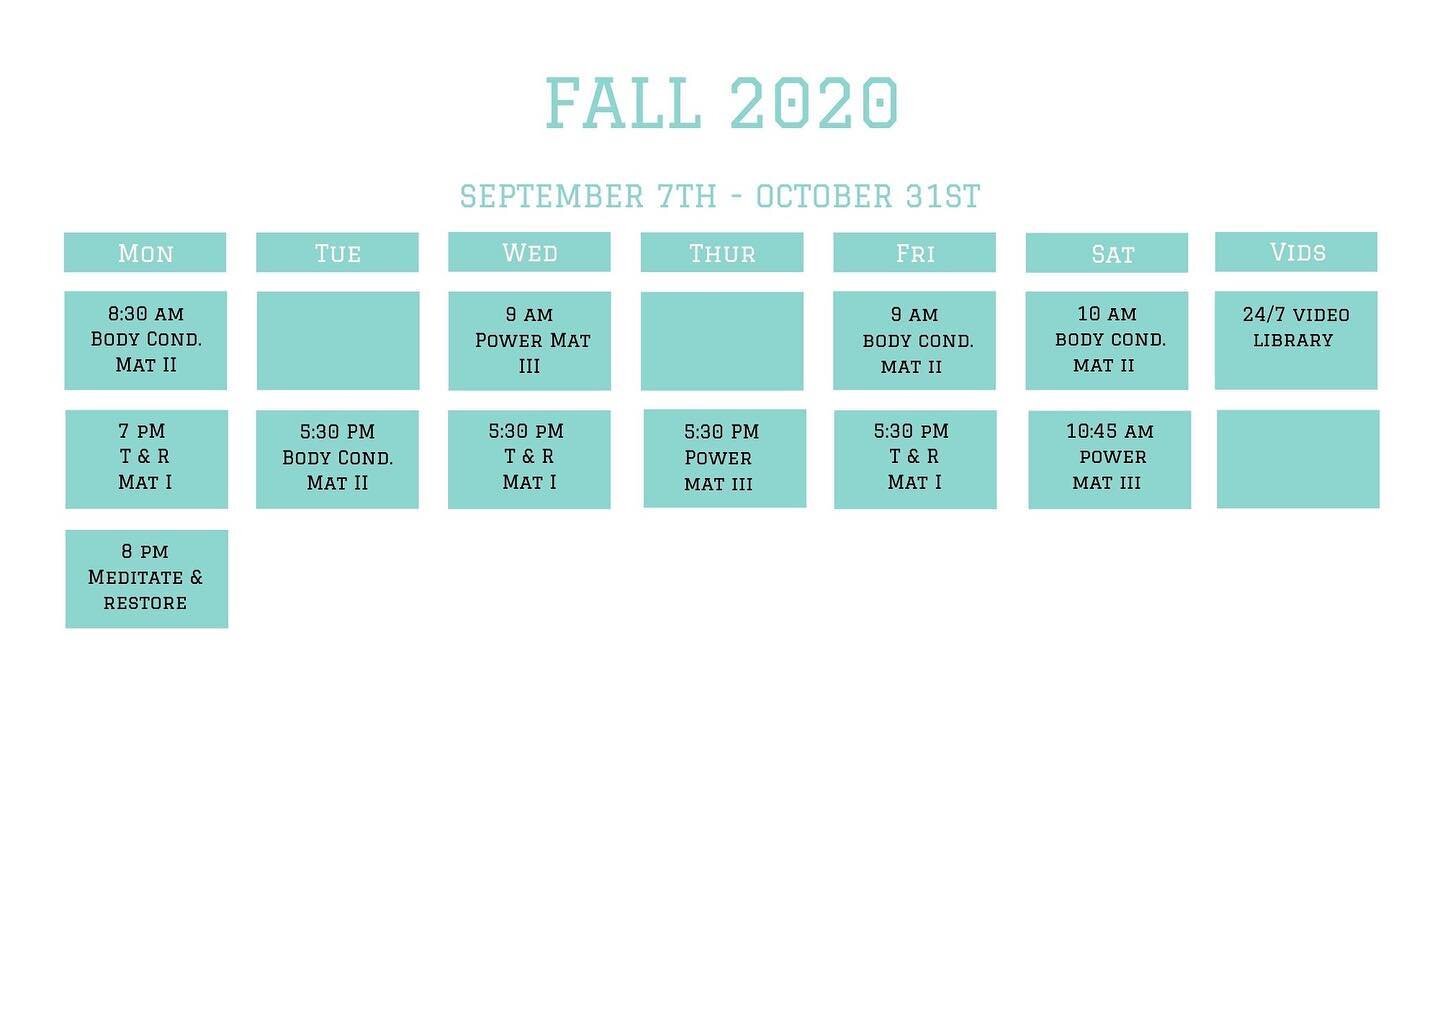 Our Fall 🍃schedule is up and ready for you to start BOOKING! ✨
Enjoy all of your favourite classes from the comfort and convenience of your home or office! Or maybe that&rsquo;s the same thing 😉 
Can&rsquo;t make it to class? No worries! With every